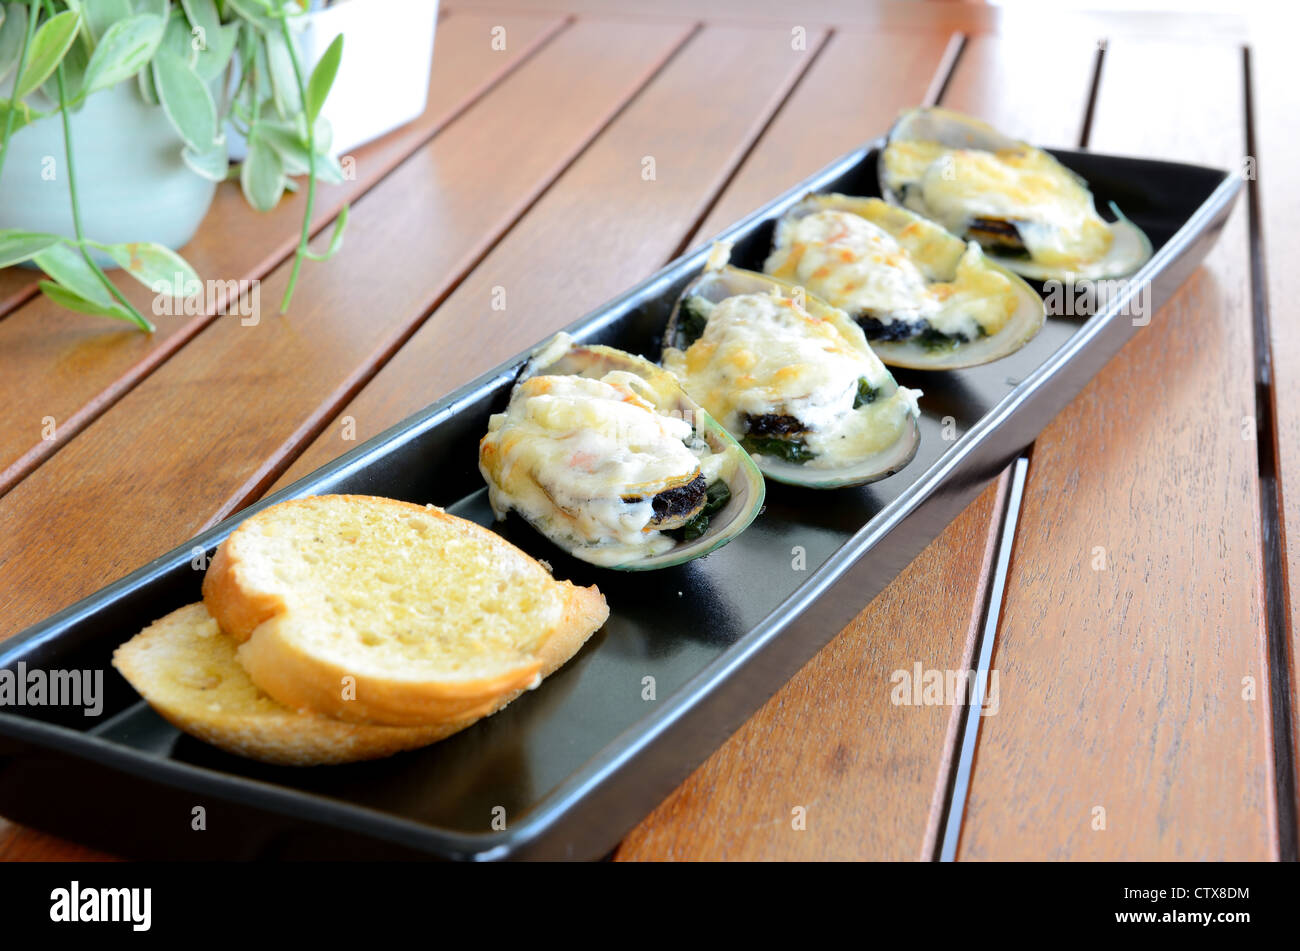 Side view of food call 'Baked mussel with cheese' served on the wooden table. Stock Photo